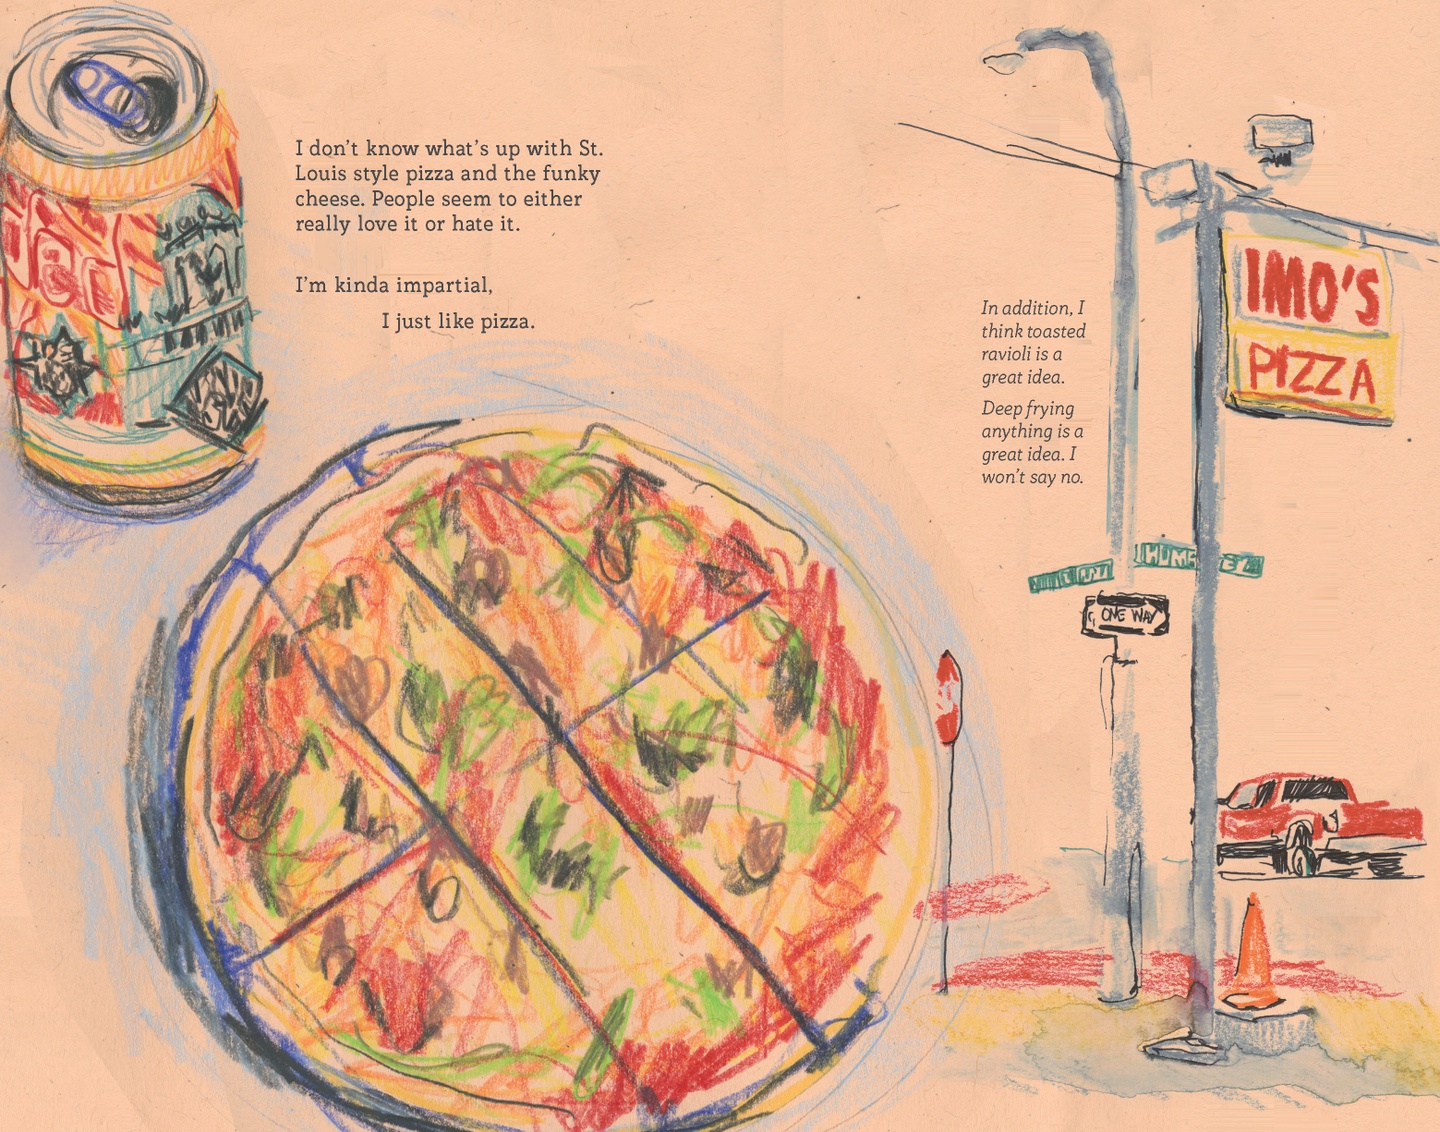 Drawing of a St. Louis style pizza cut into squares, a can of local craft beer, and a drawing of the Imo's Pizza sign on a street corner.